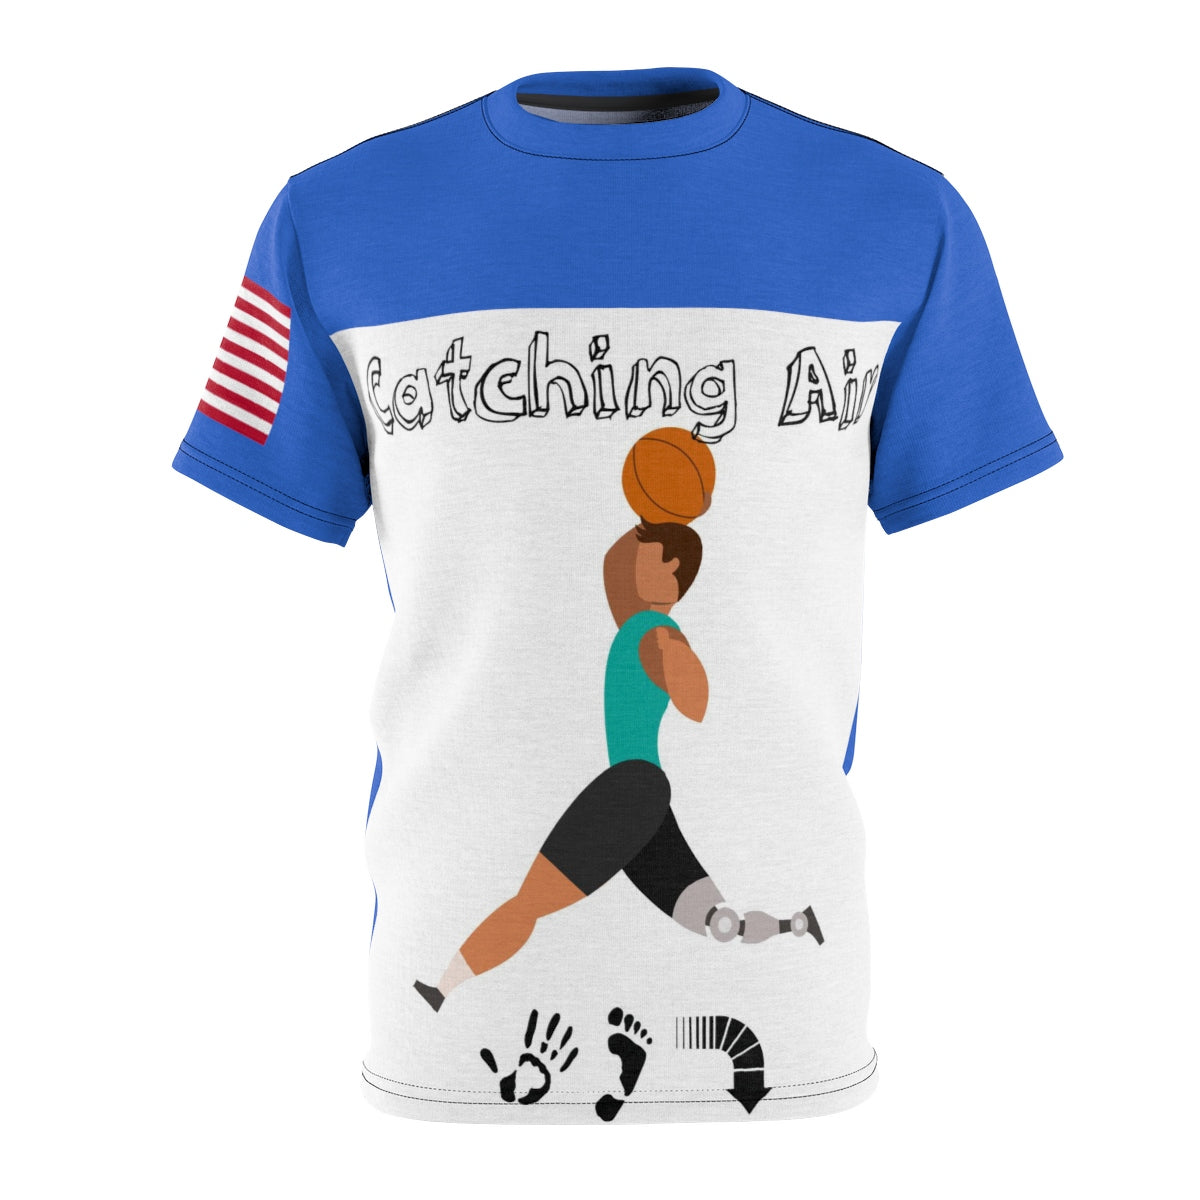 Five Toes Down Catching Air Unisex Cut & Sew Tee